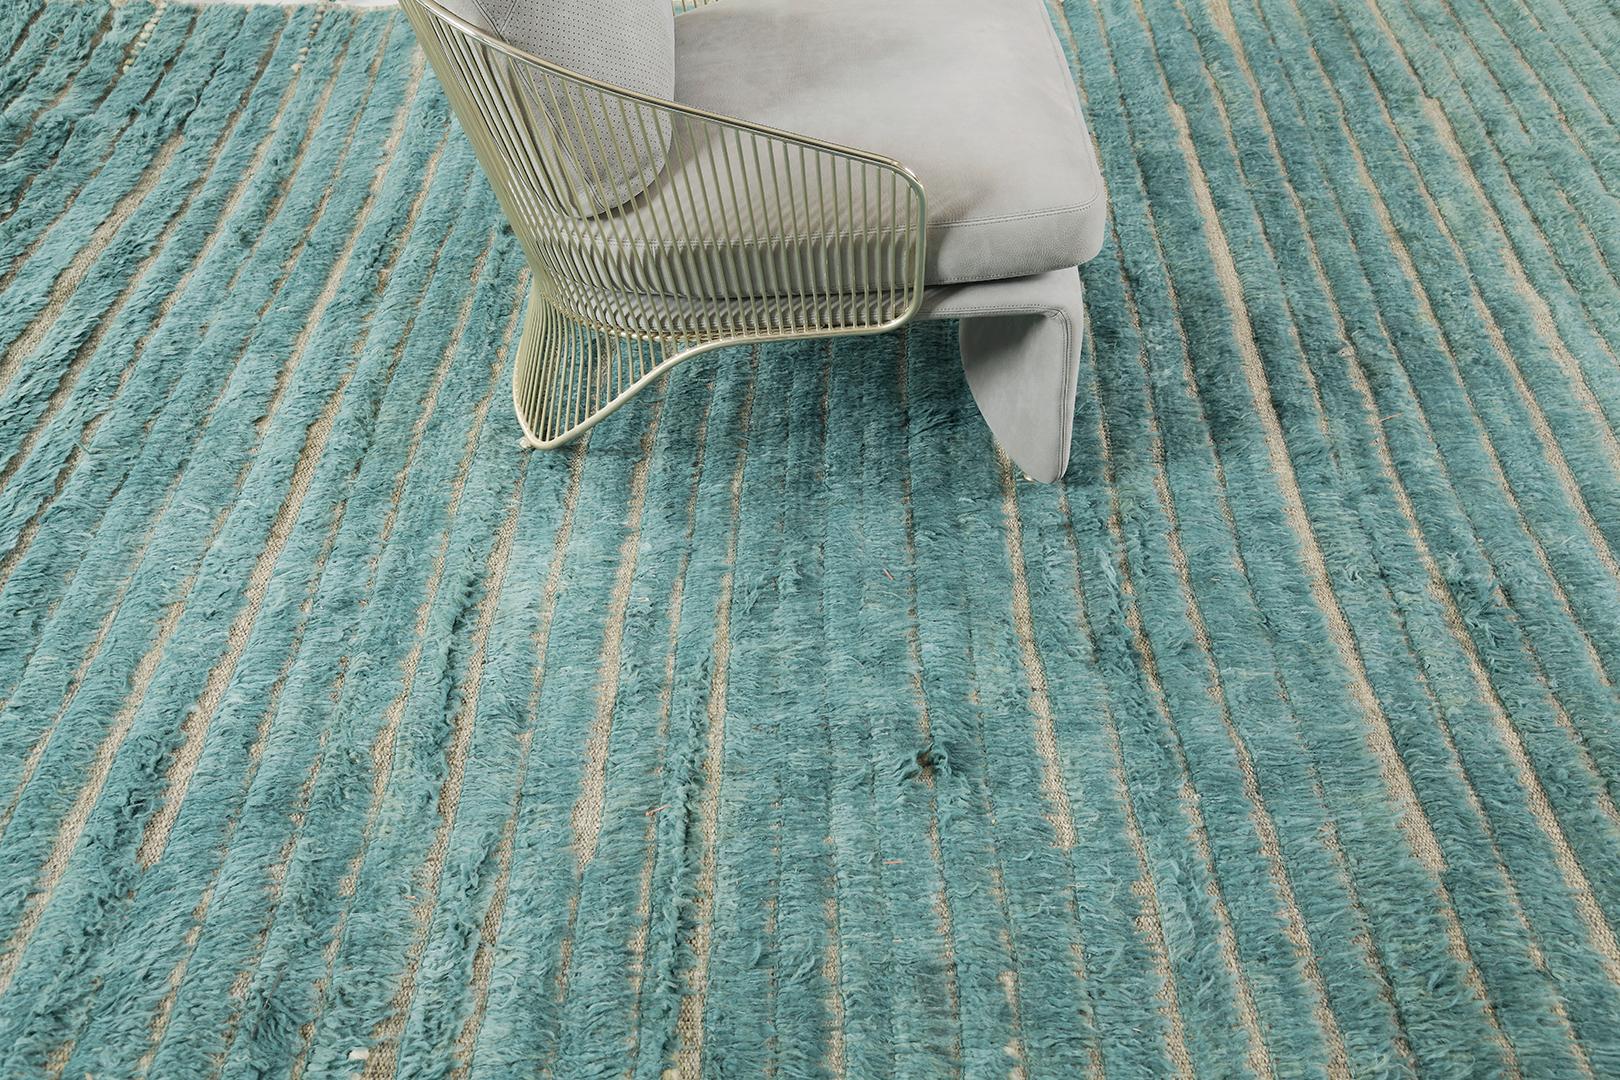 Shipca is a handwoven luxurious wool rug with timeless embossed detailing. In addition to its vibrant turquoise flat weave, Shipca has a beautiful shag that brings a lustrous and contemporary feel to one's space. The Haute Bohemian collection is